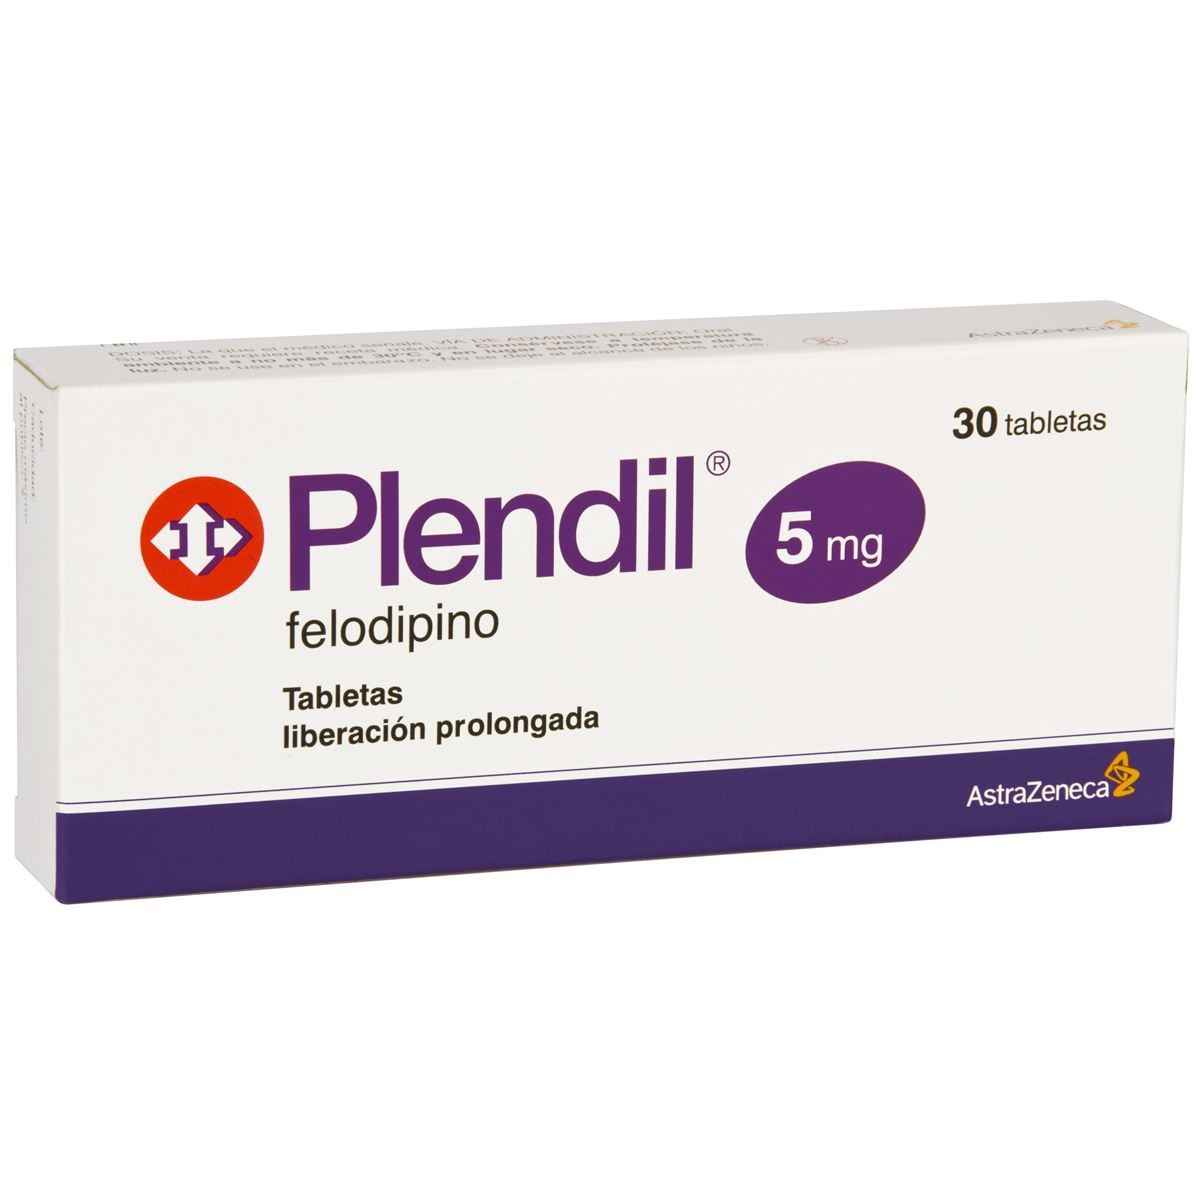 FELODIPINE EXTENDED-RELEASE - ORAL Plendil side effects medical uses and drug interactions